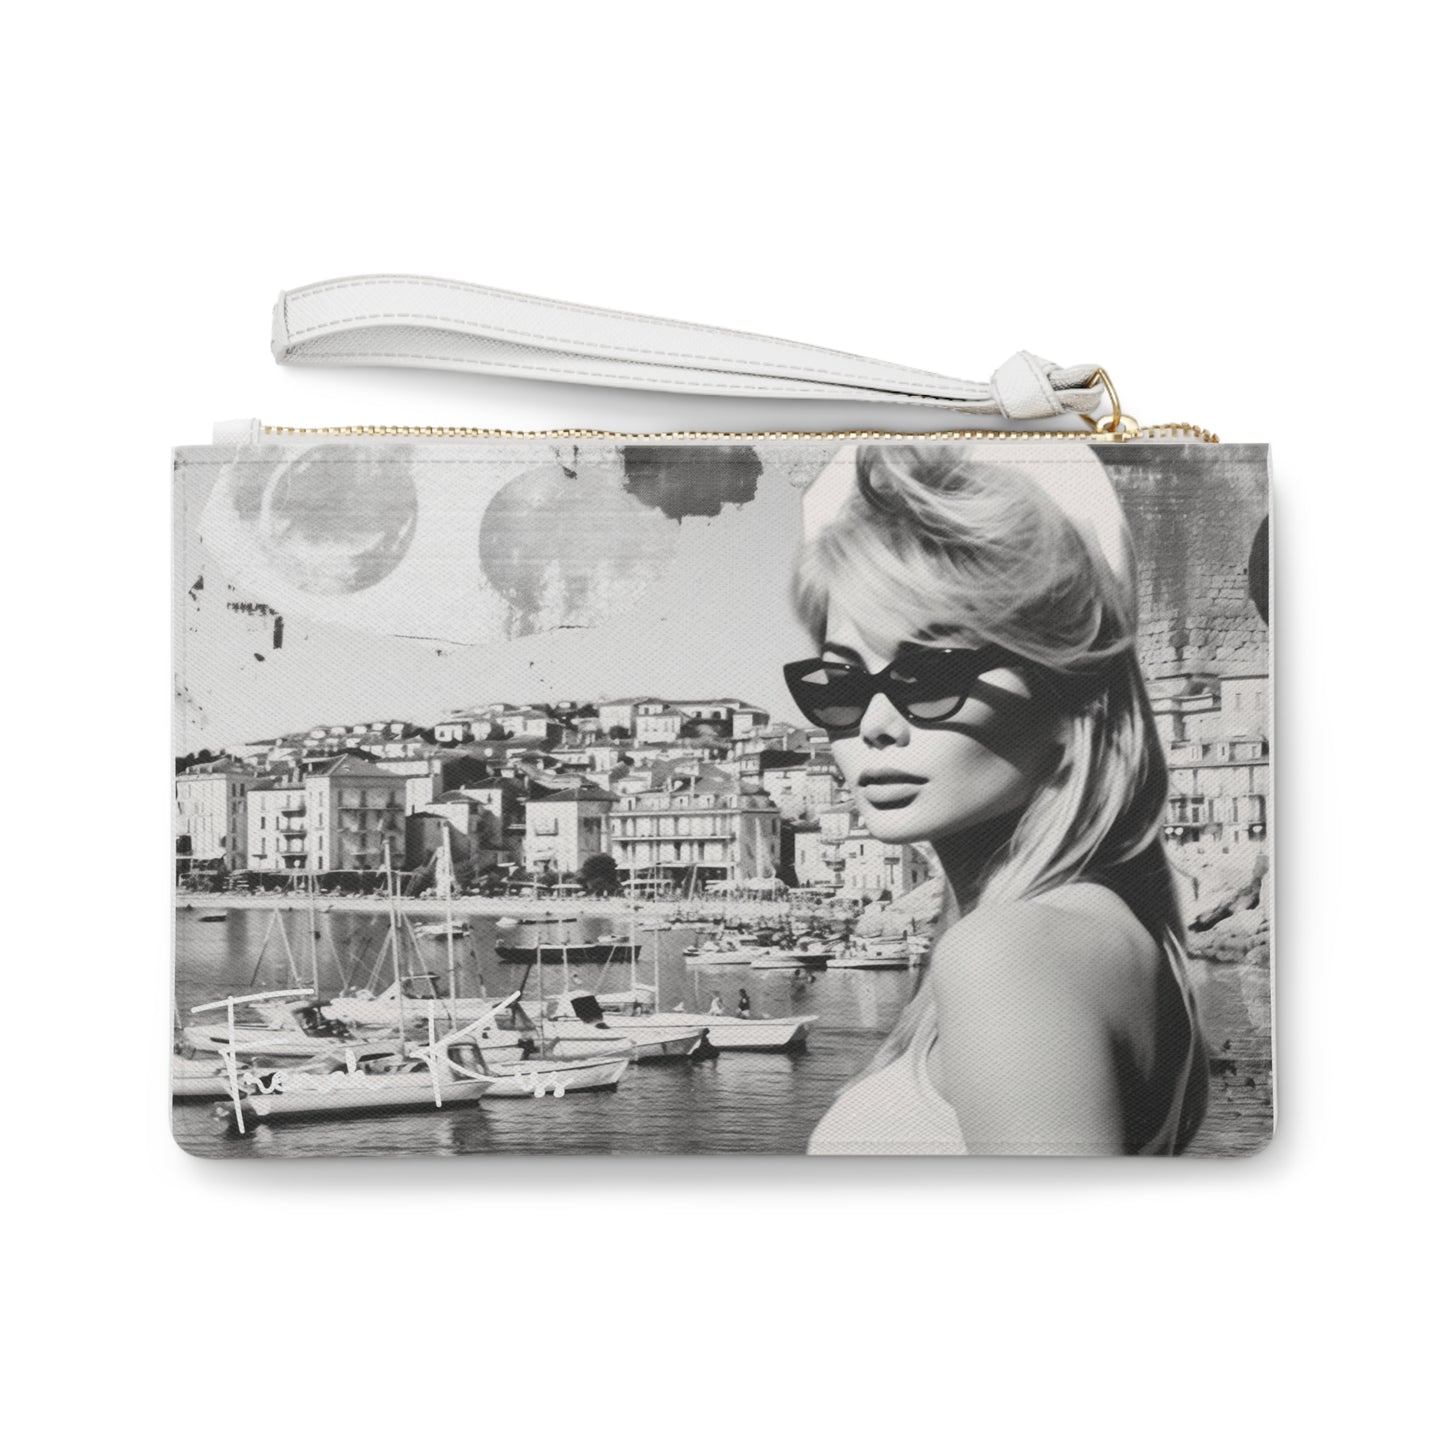 COTE D'AZUR French Kiss Pop Art, Sexy, Sassy CLUTCH Bag, France Couture, Travel, Fashion, Luxury, Chic French designer, must have gift item